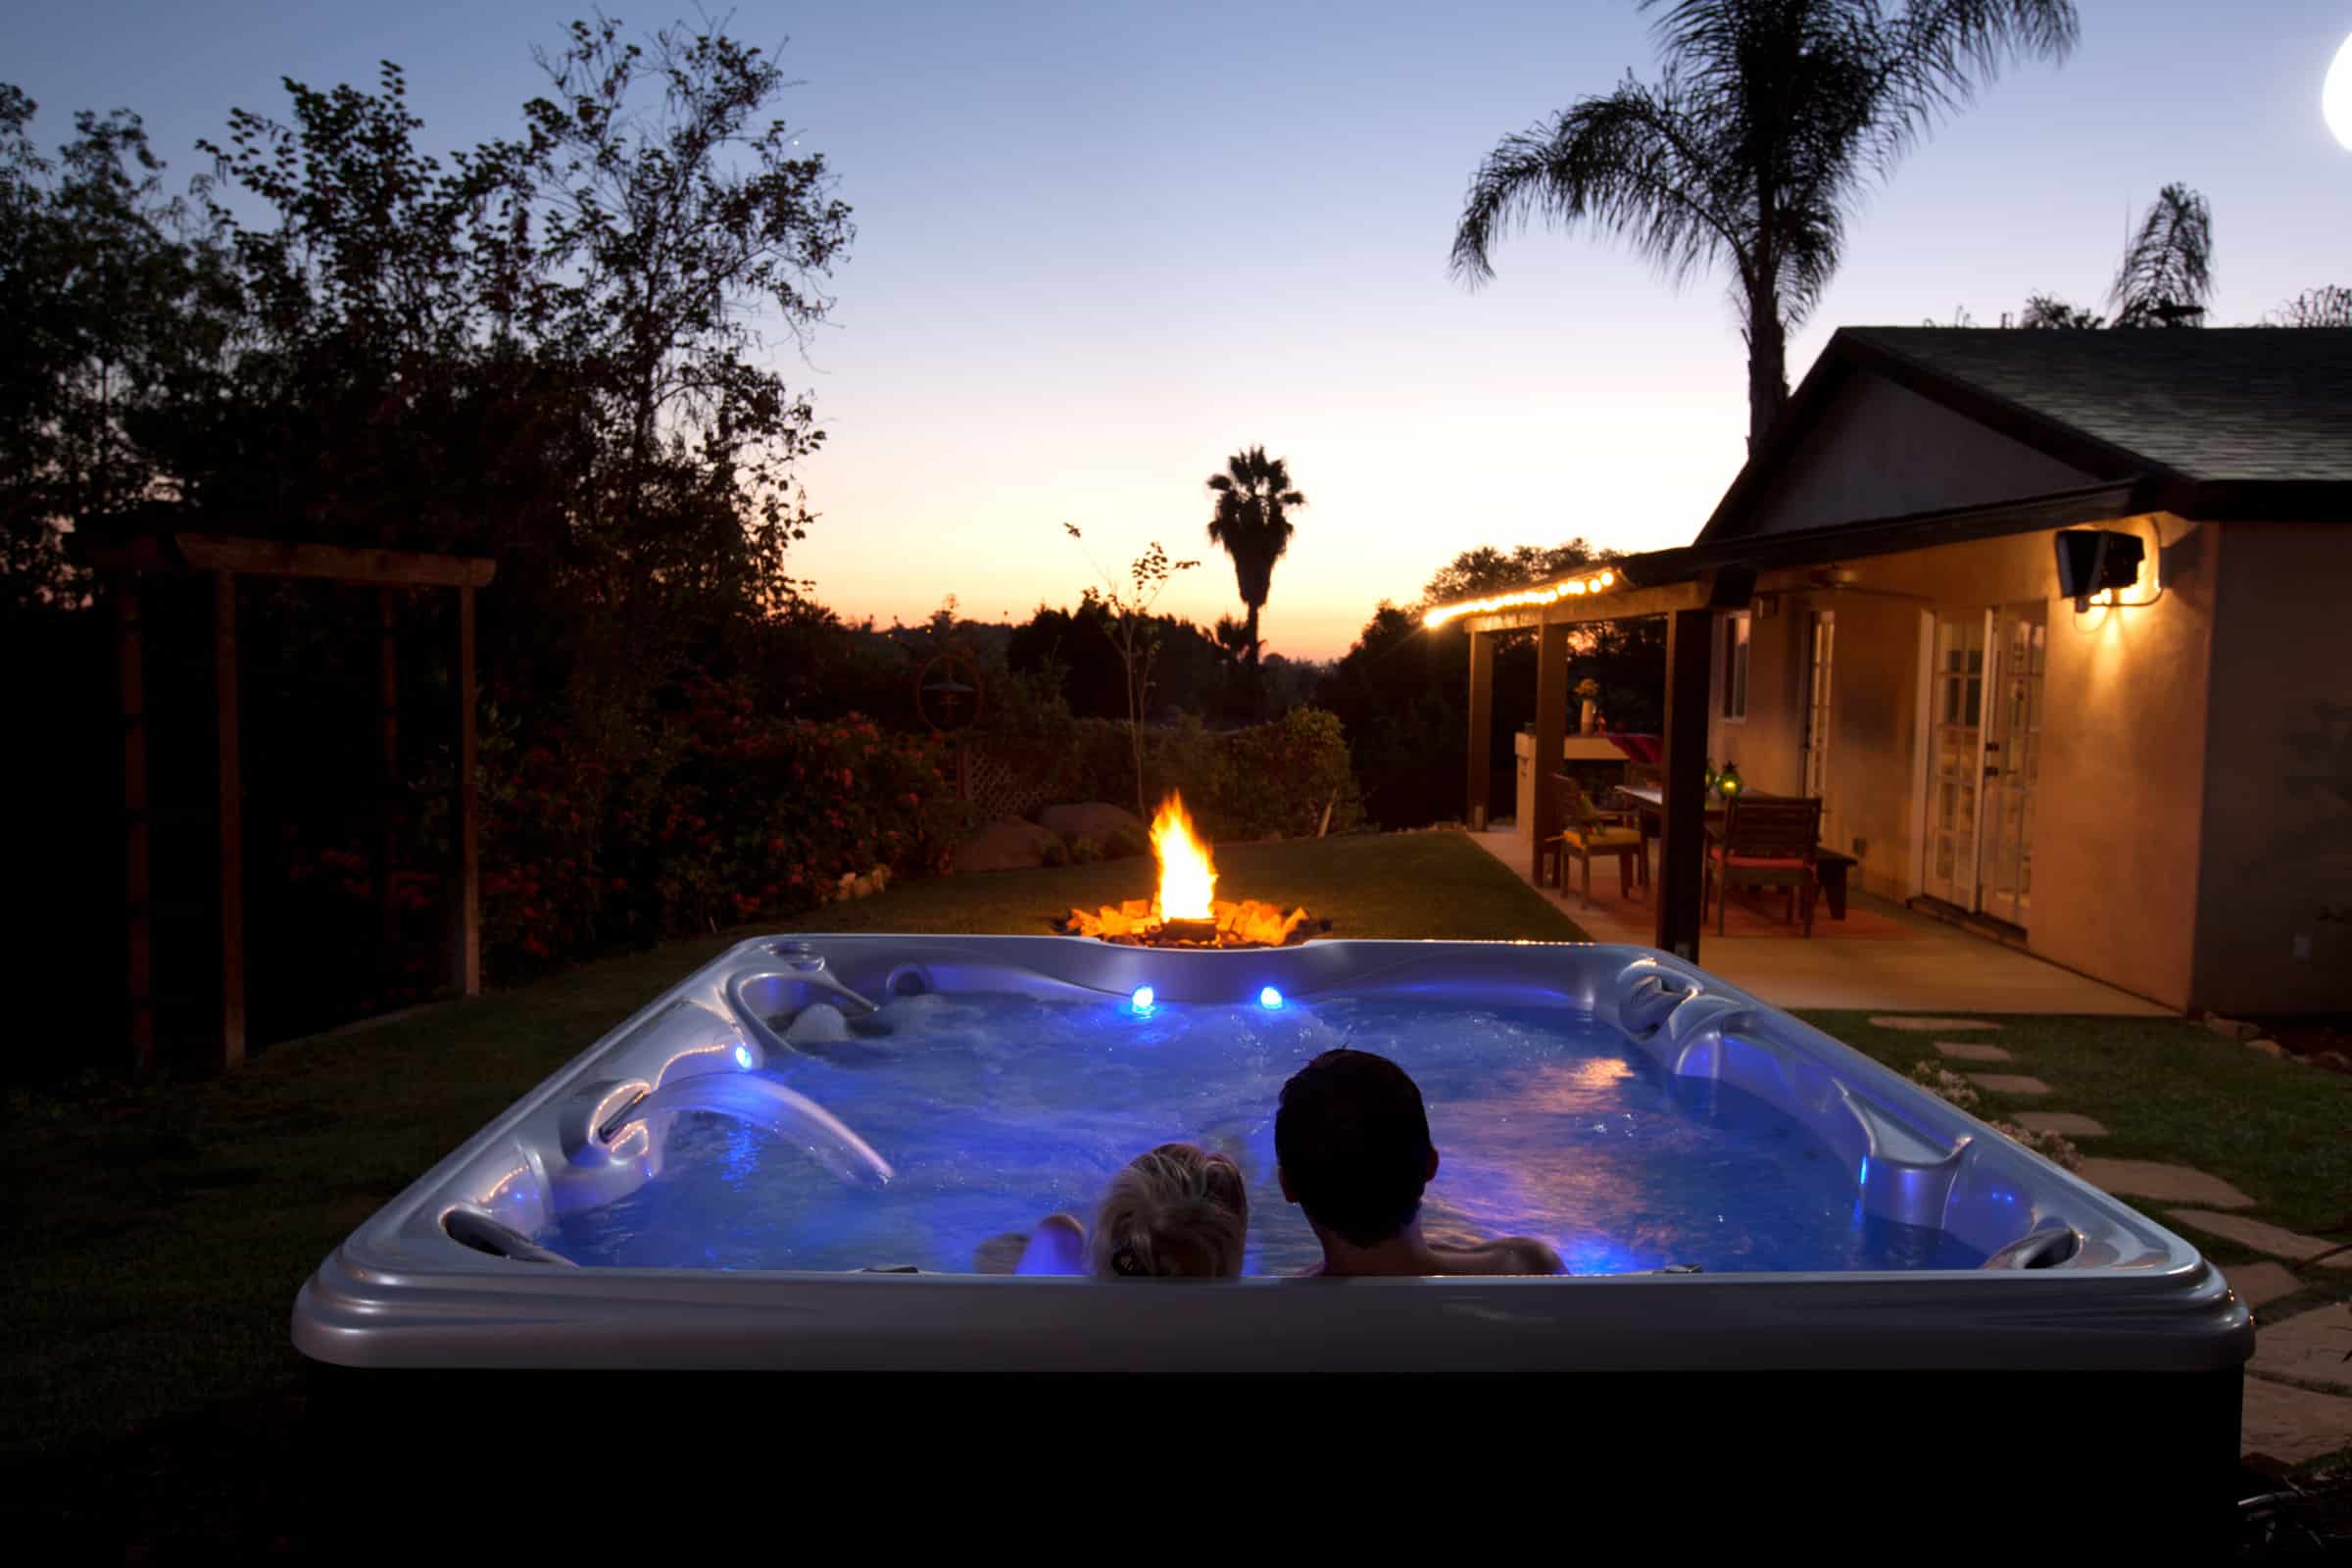 A Hot Tub to Make Your Neighbors Green with Envy